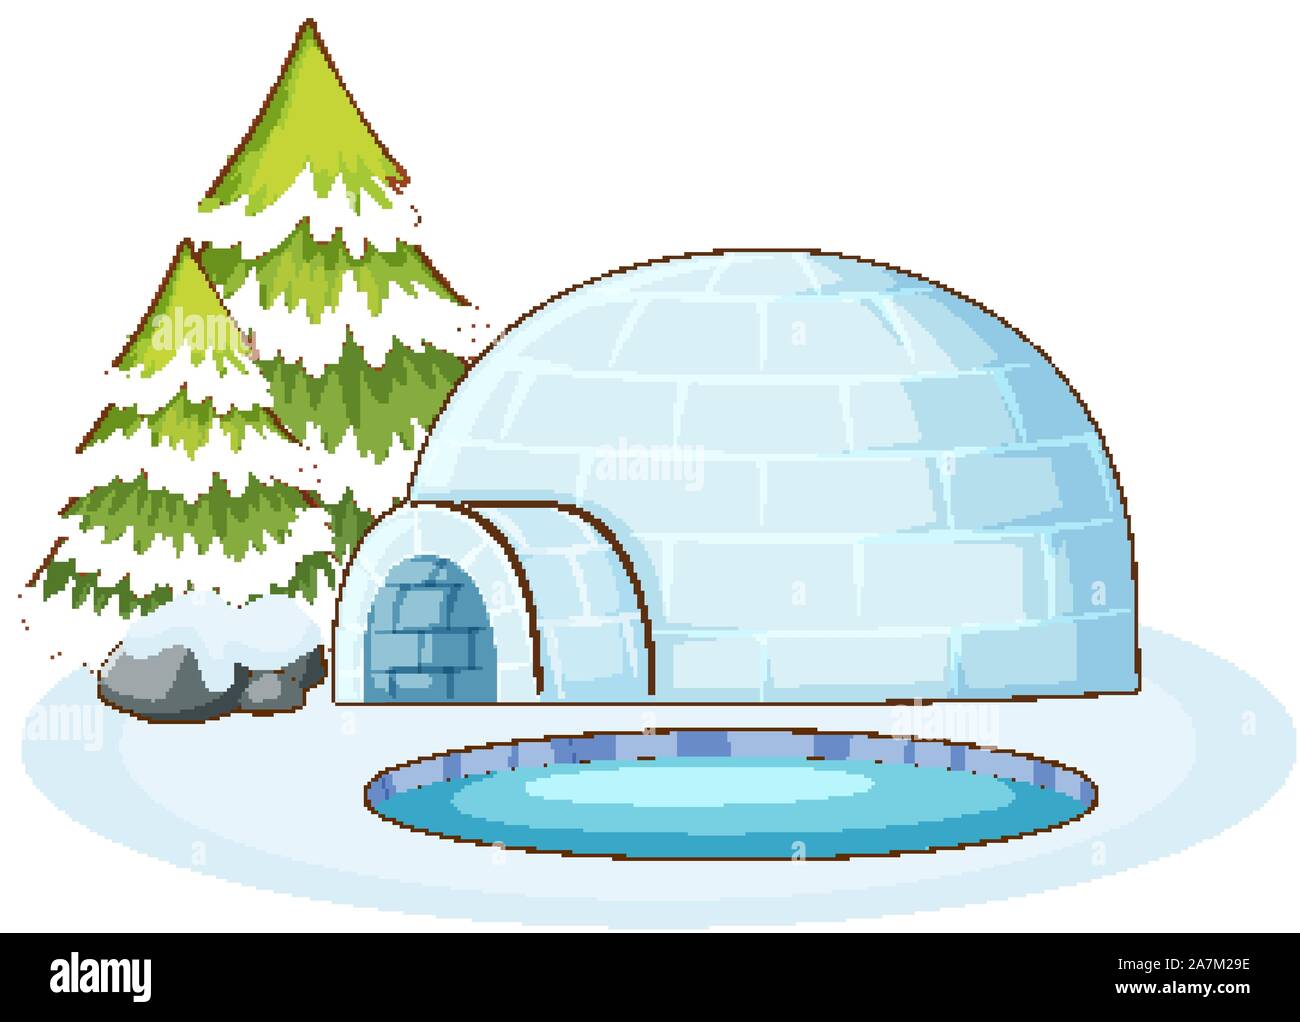 Isolated picture of igloo illustration Stock Vector